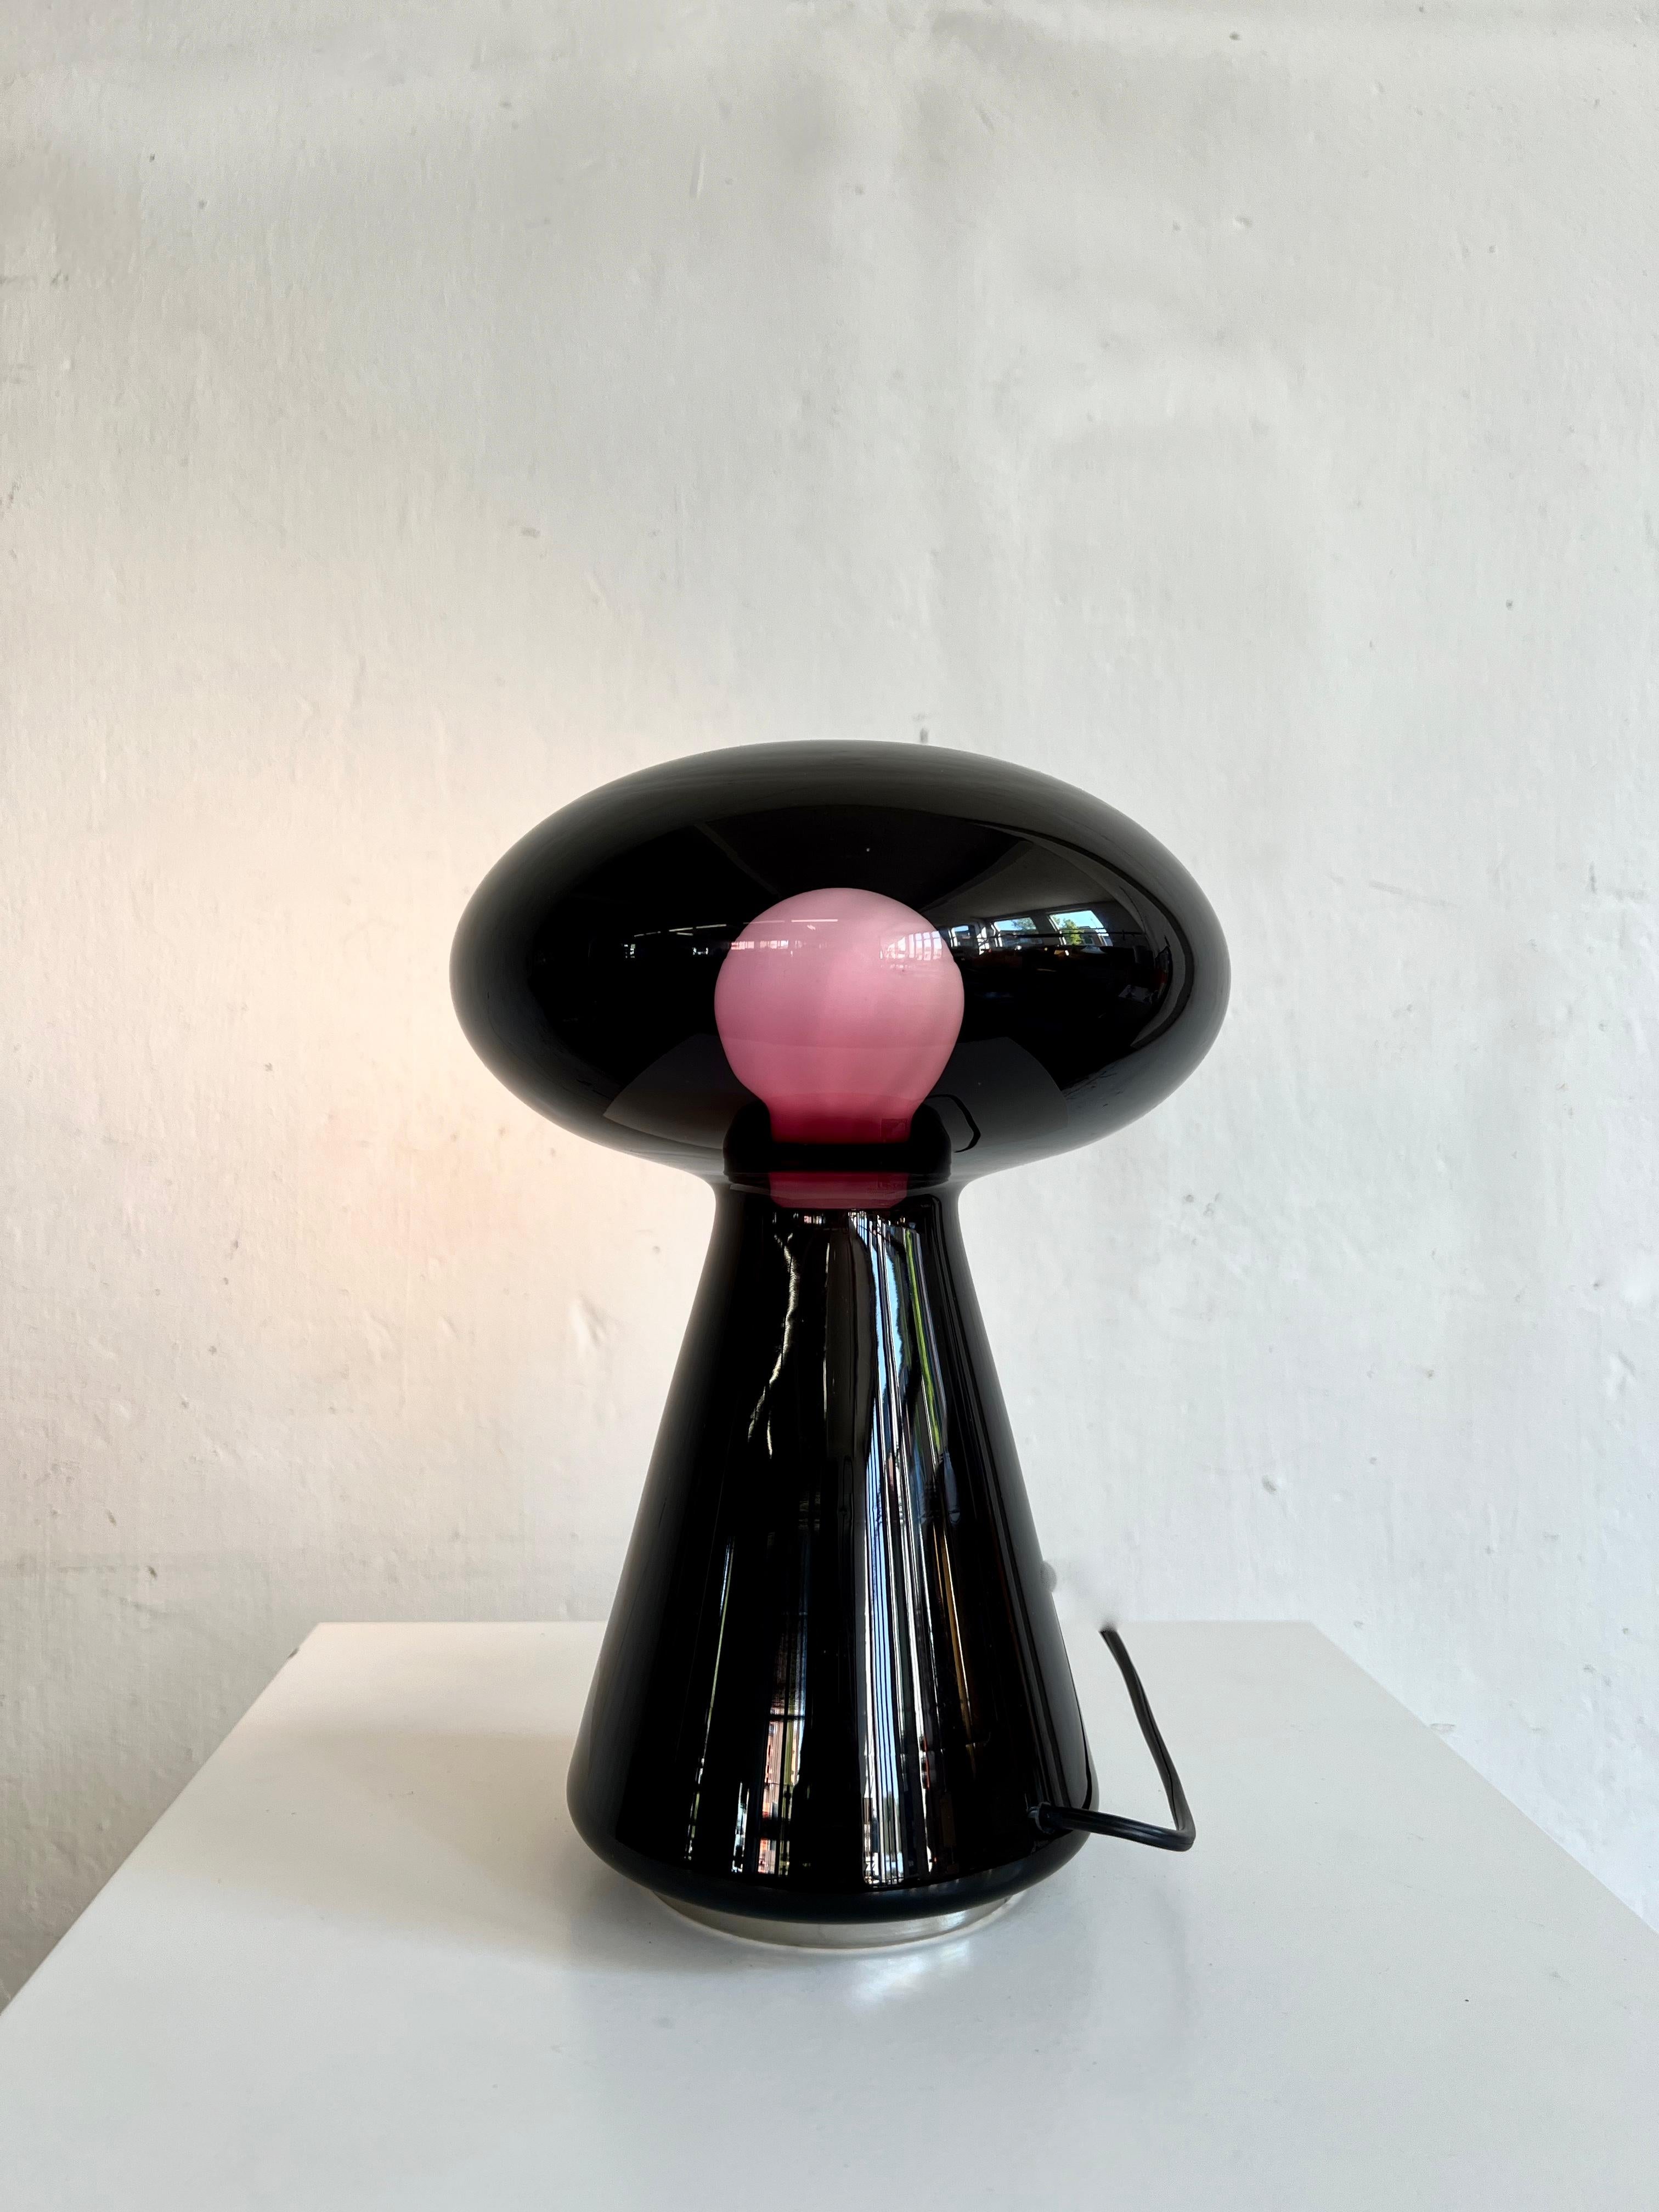 Very rare table lamp in black-purple mouth blown glass by Vistosi, 1970. Designed by Michael Red. Model L423.
 
The glass appears to be black but when switched on it shows purple around the bulb. Amazing quality in both design and quality.

It oozes